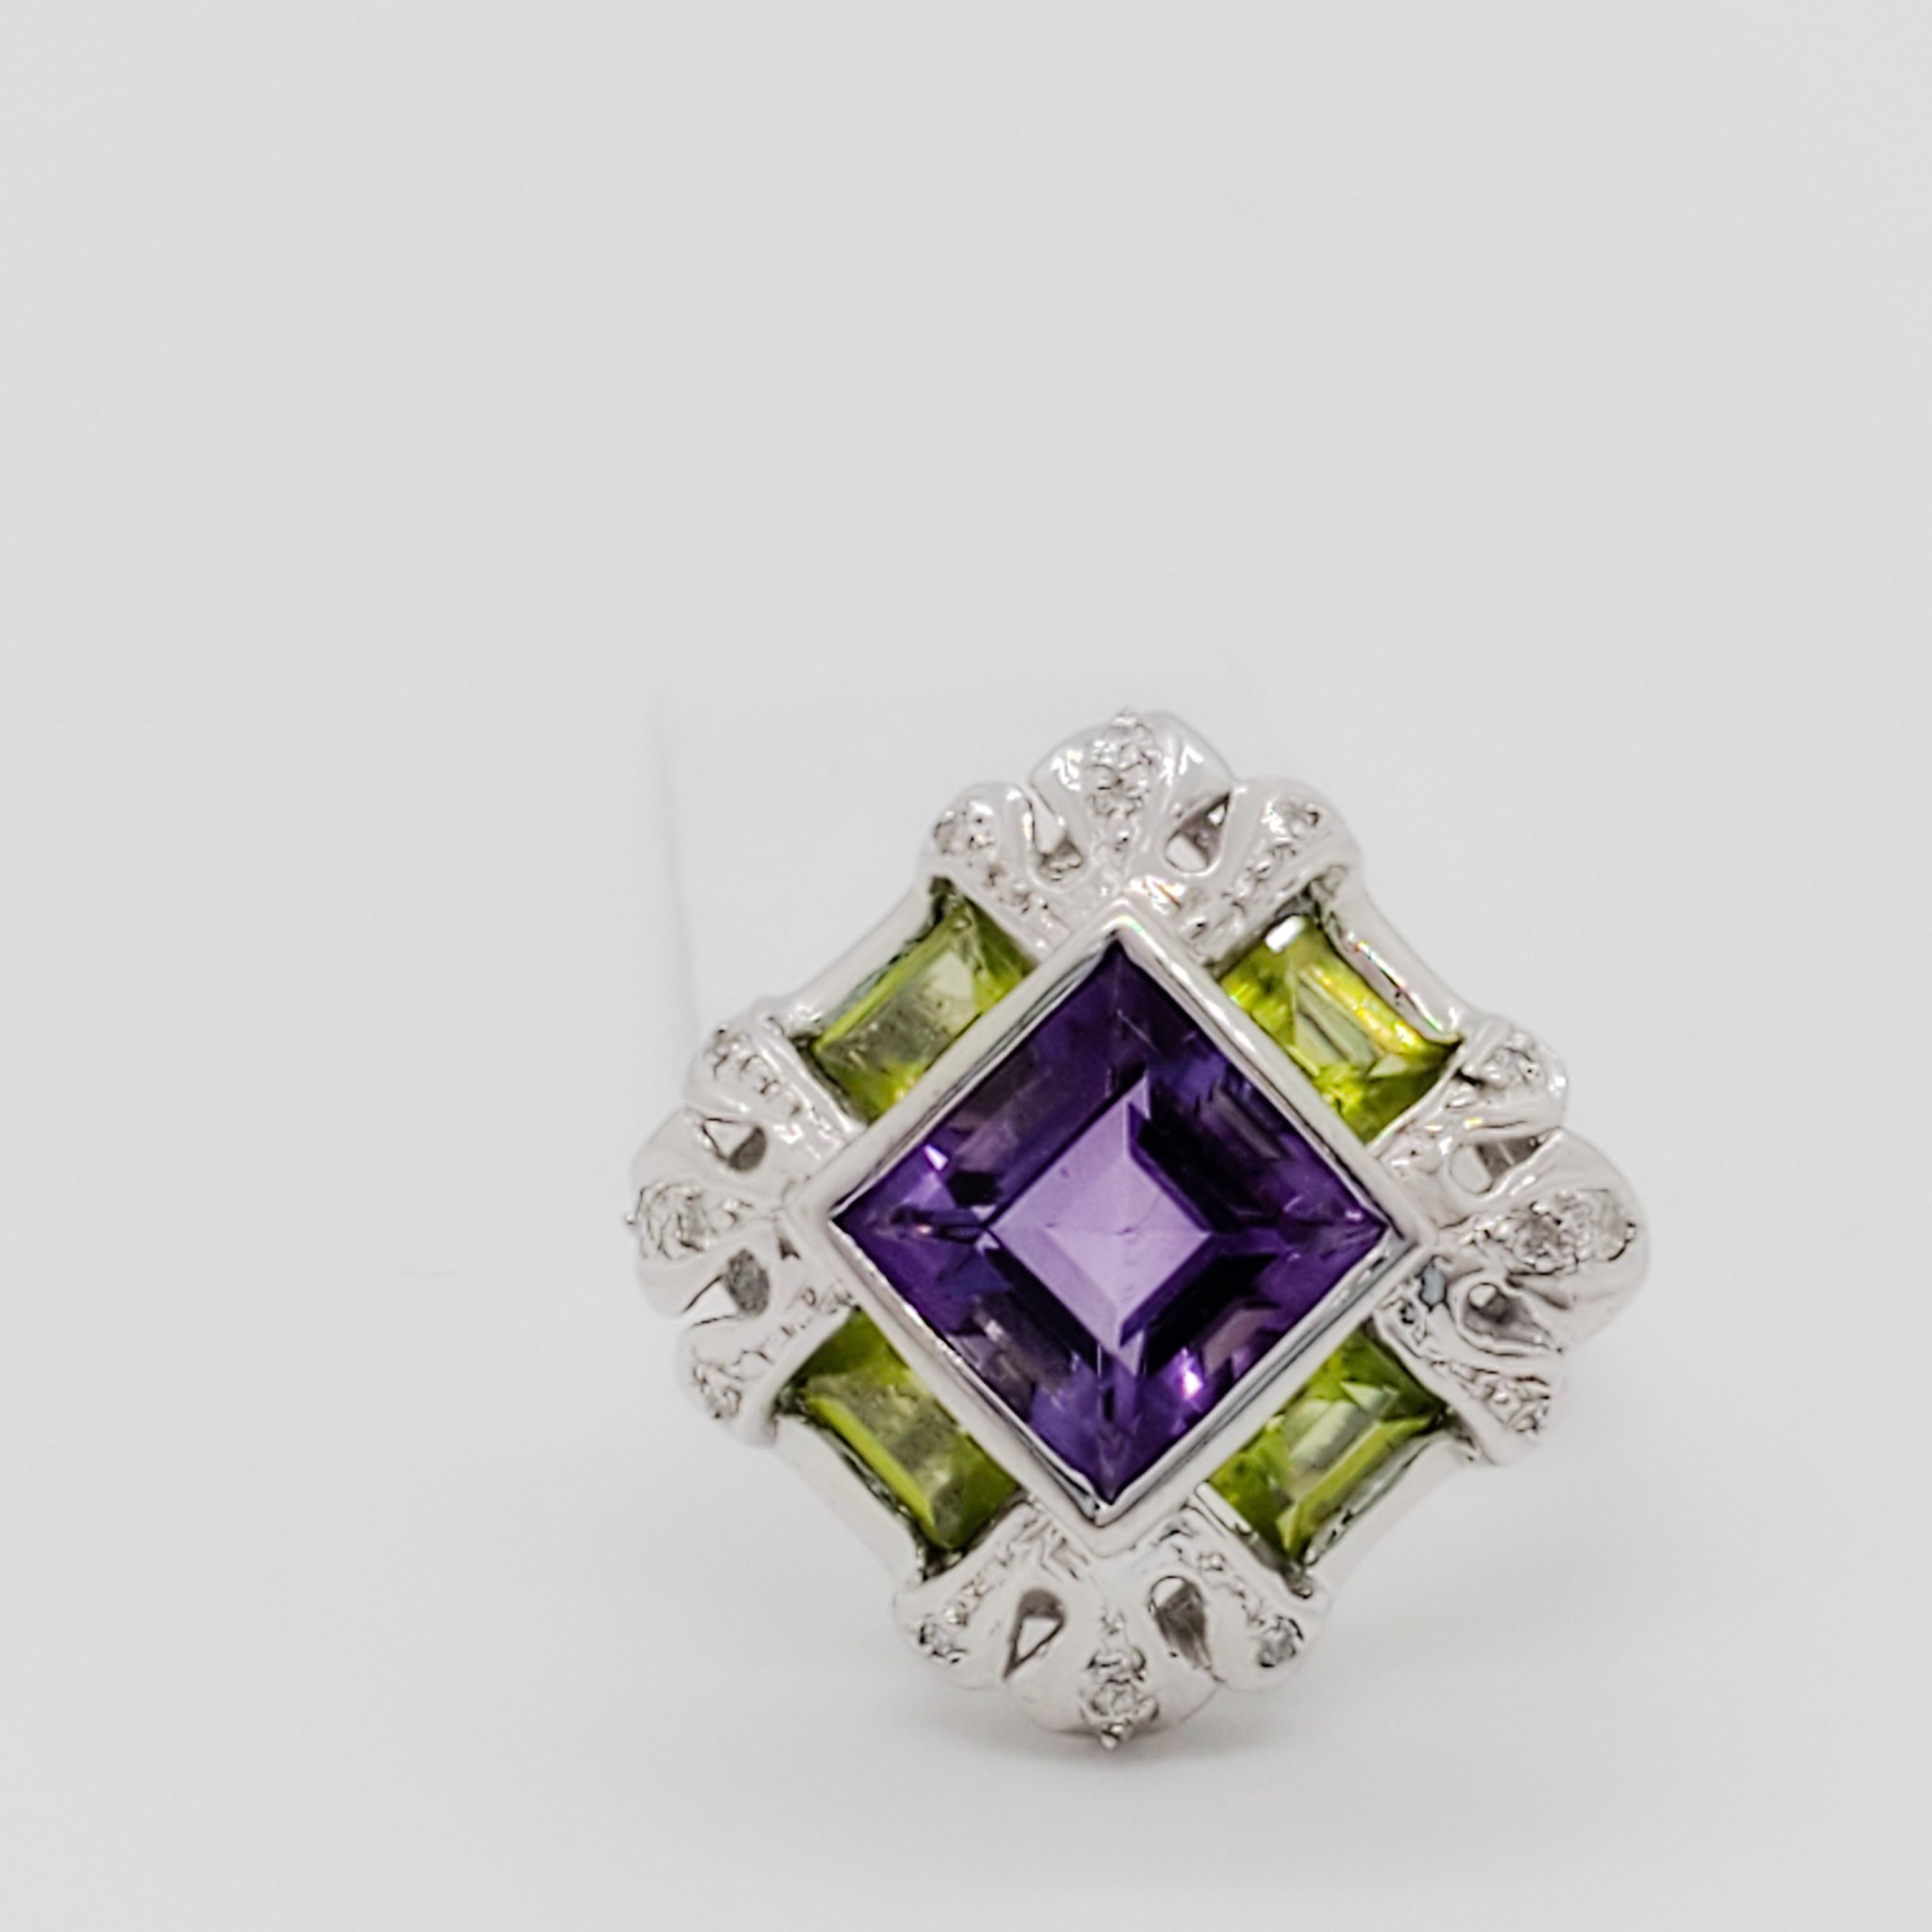 Square Cut Amethyst and Peridot Cocktail Ring in 18k White Gold